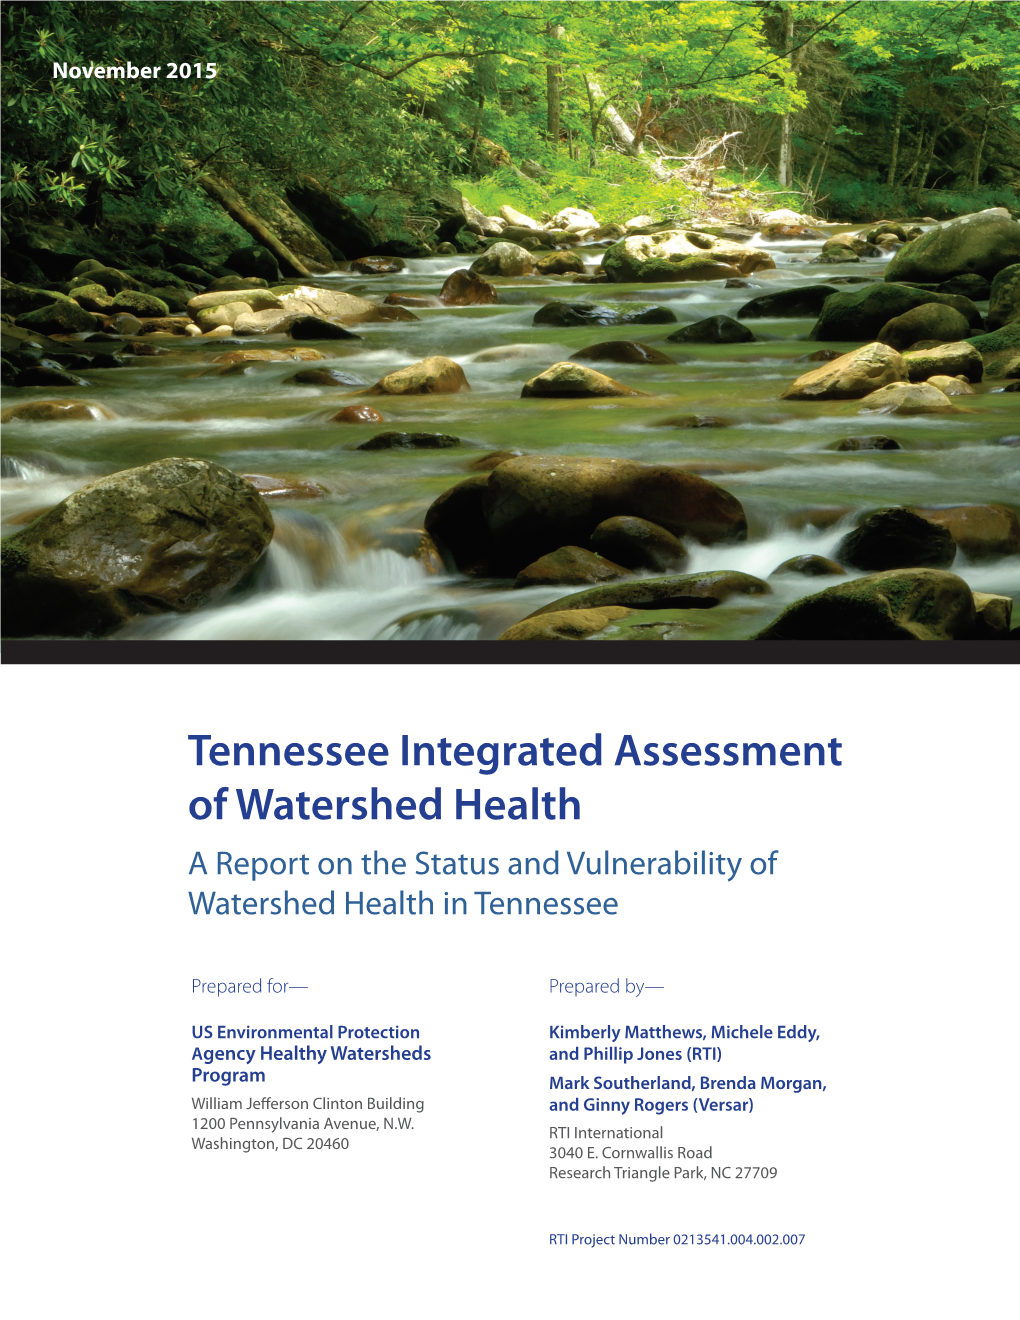 Tennessee Integrated Assessment of Watershed Health (PDF)